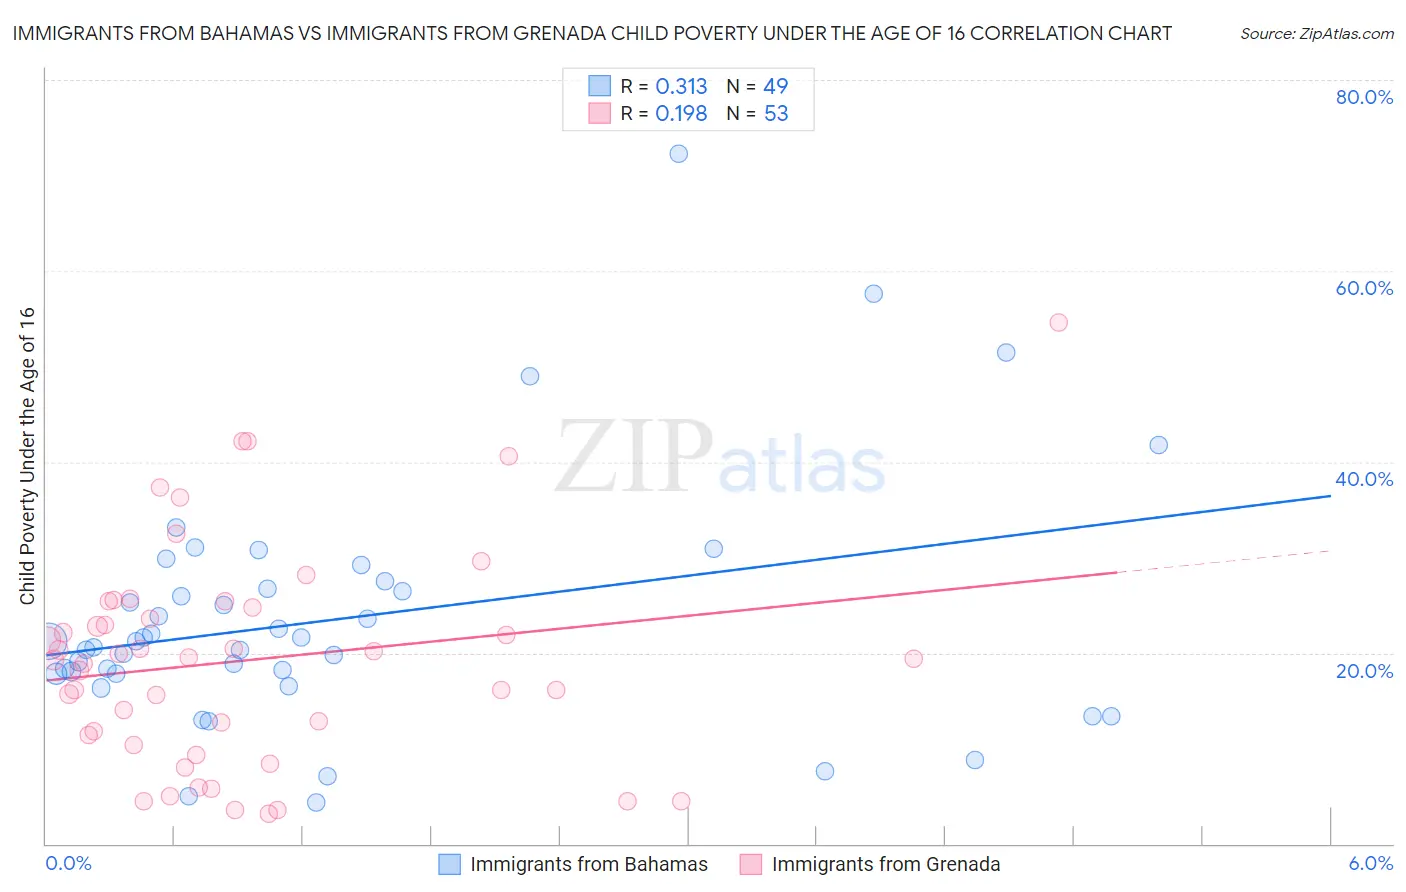 Immigrants from Bahamas vs Immigrants from Grenada Child Poverty Under the Age of 16